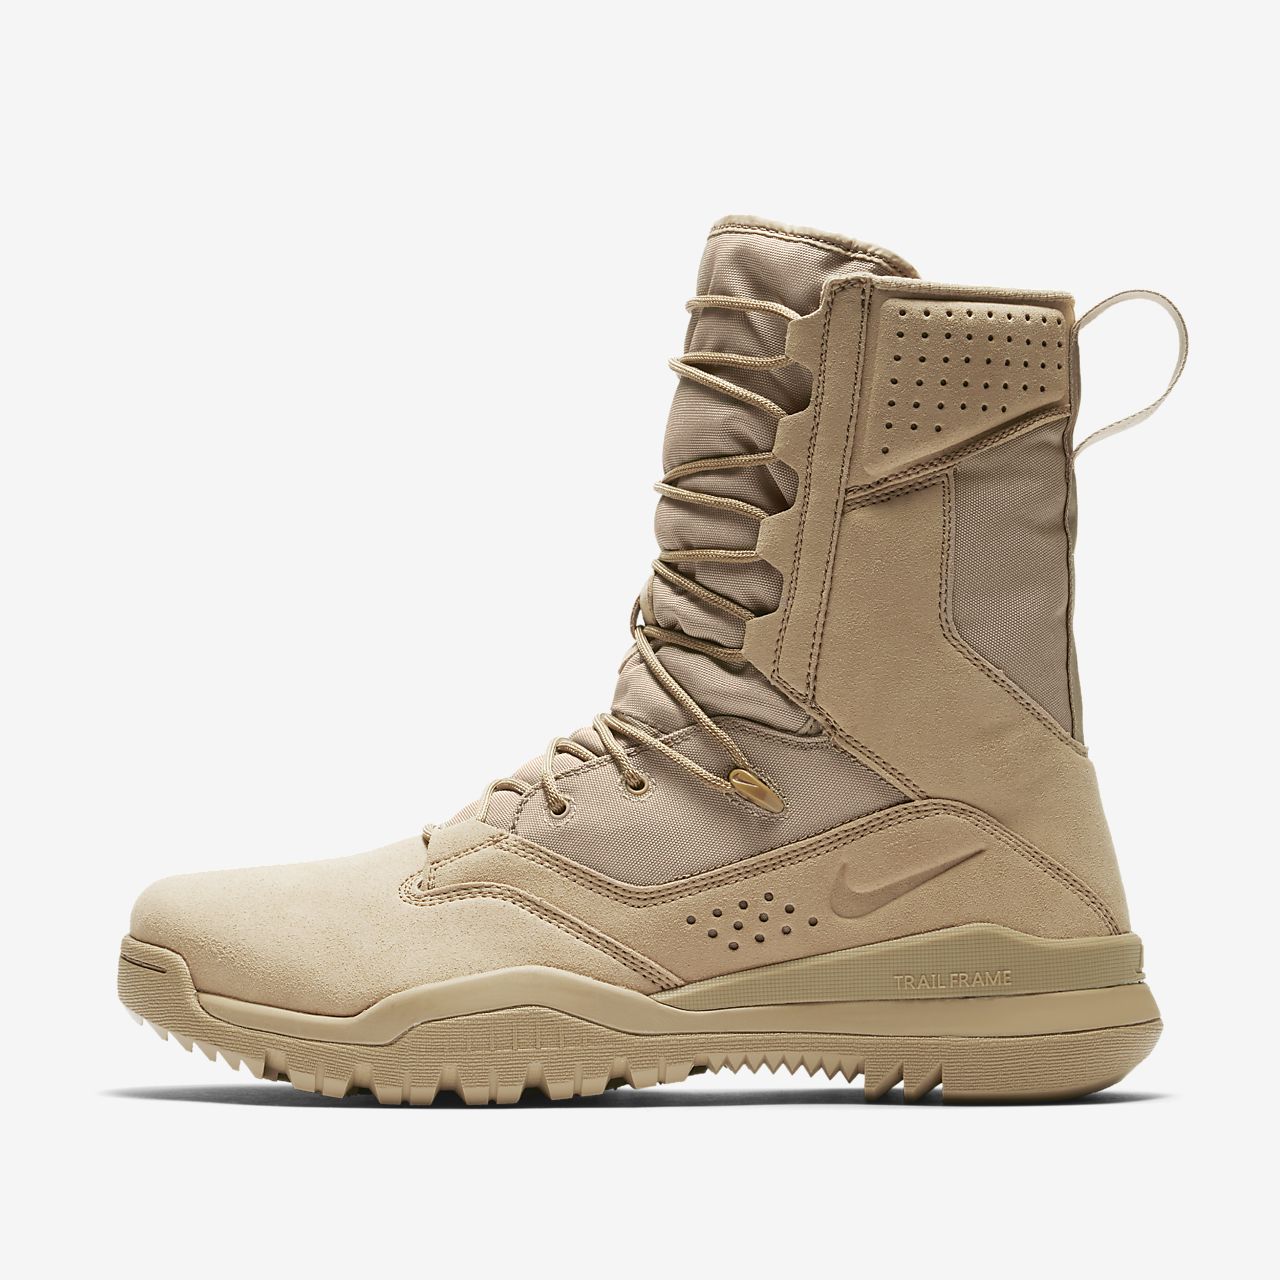 Nike Sfb Field 2 8 Tactical Boot